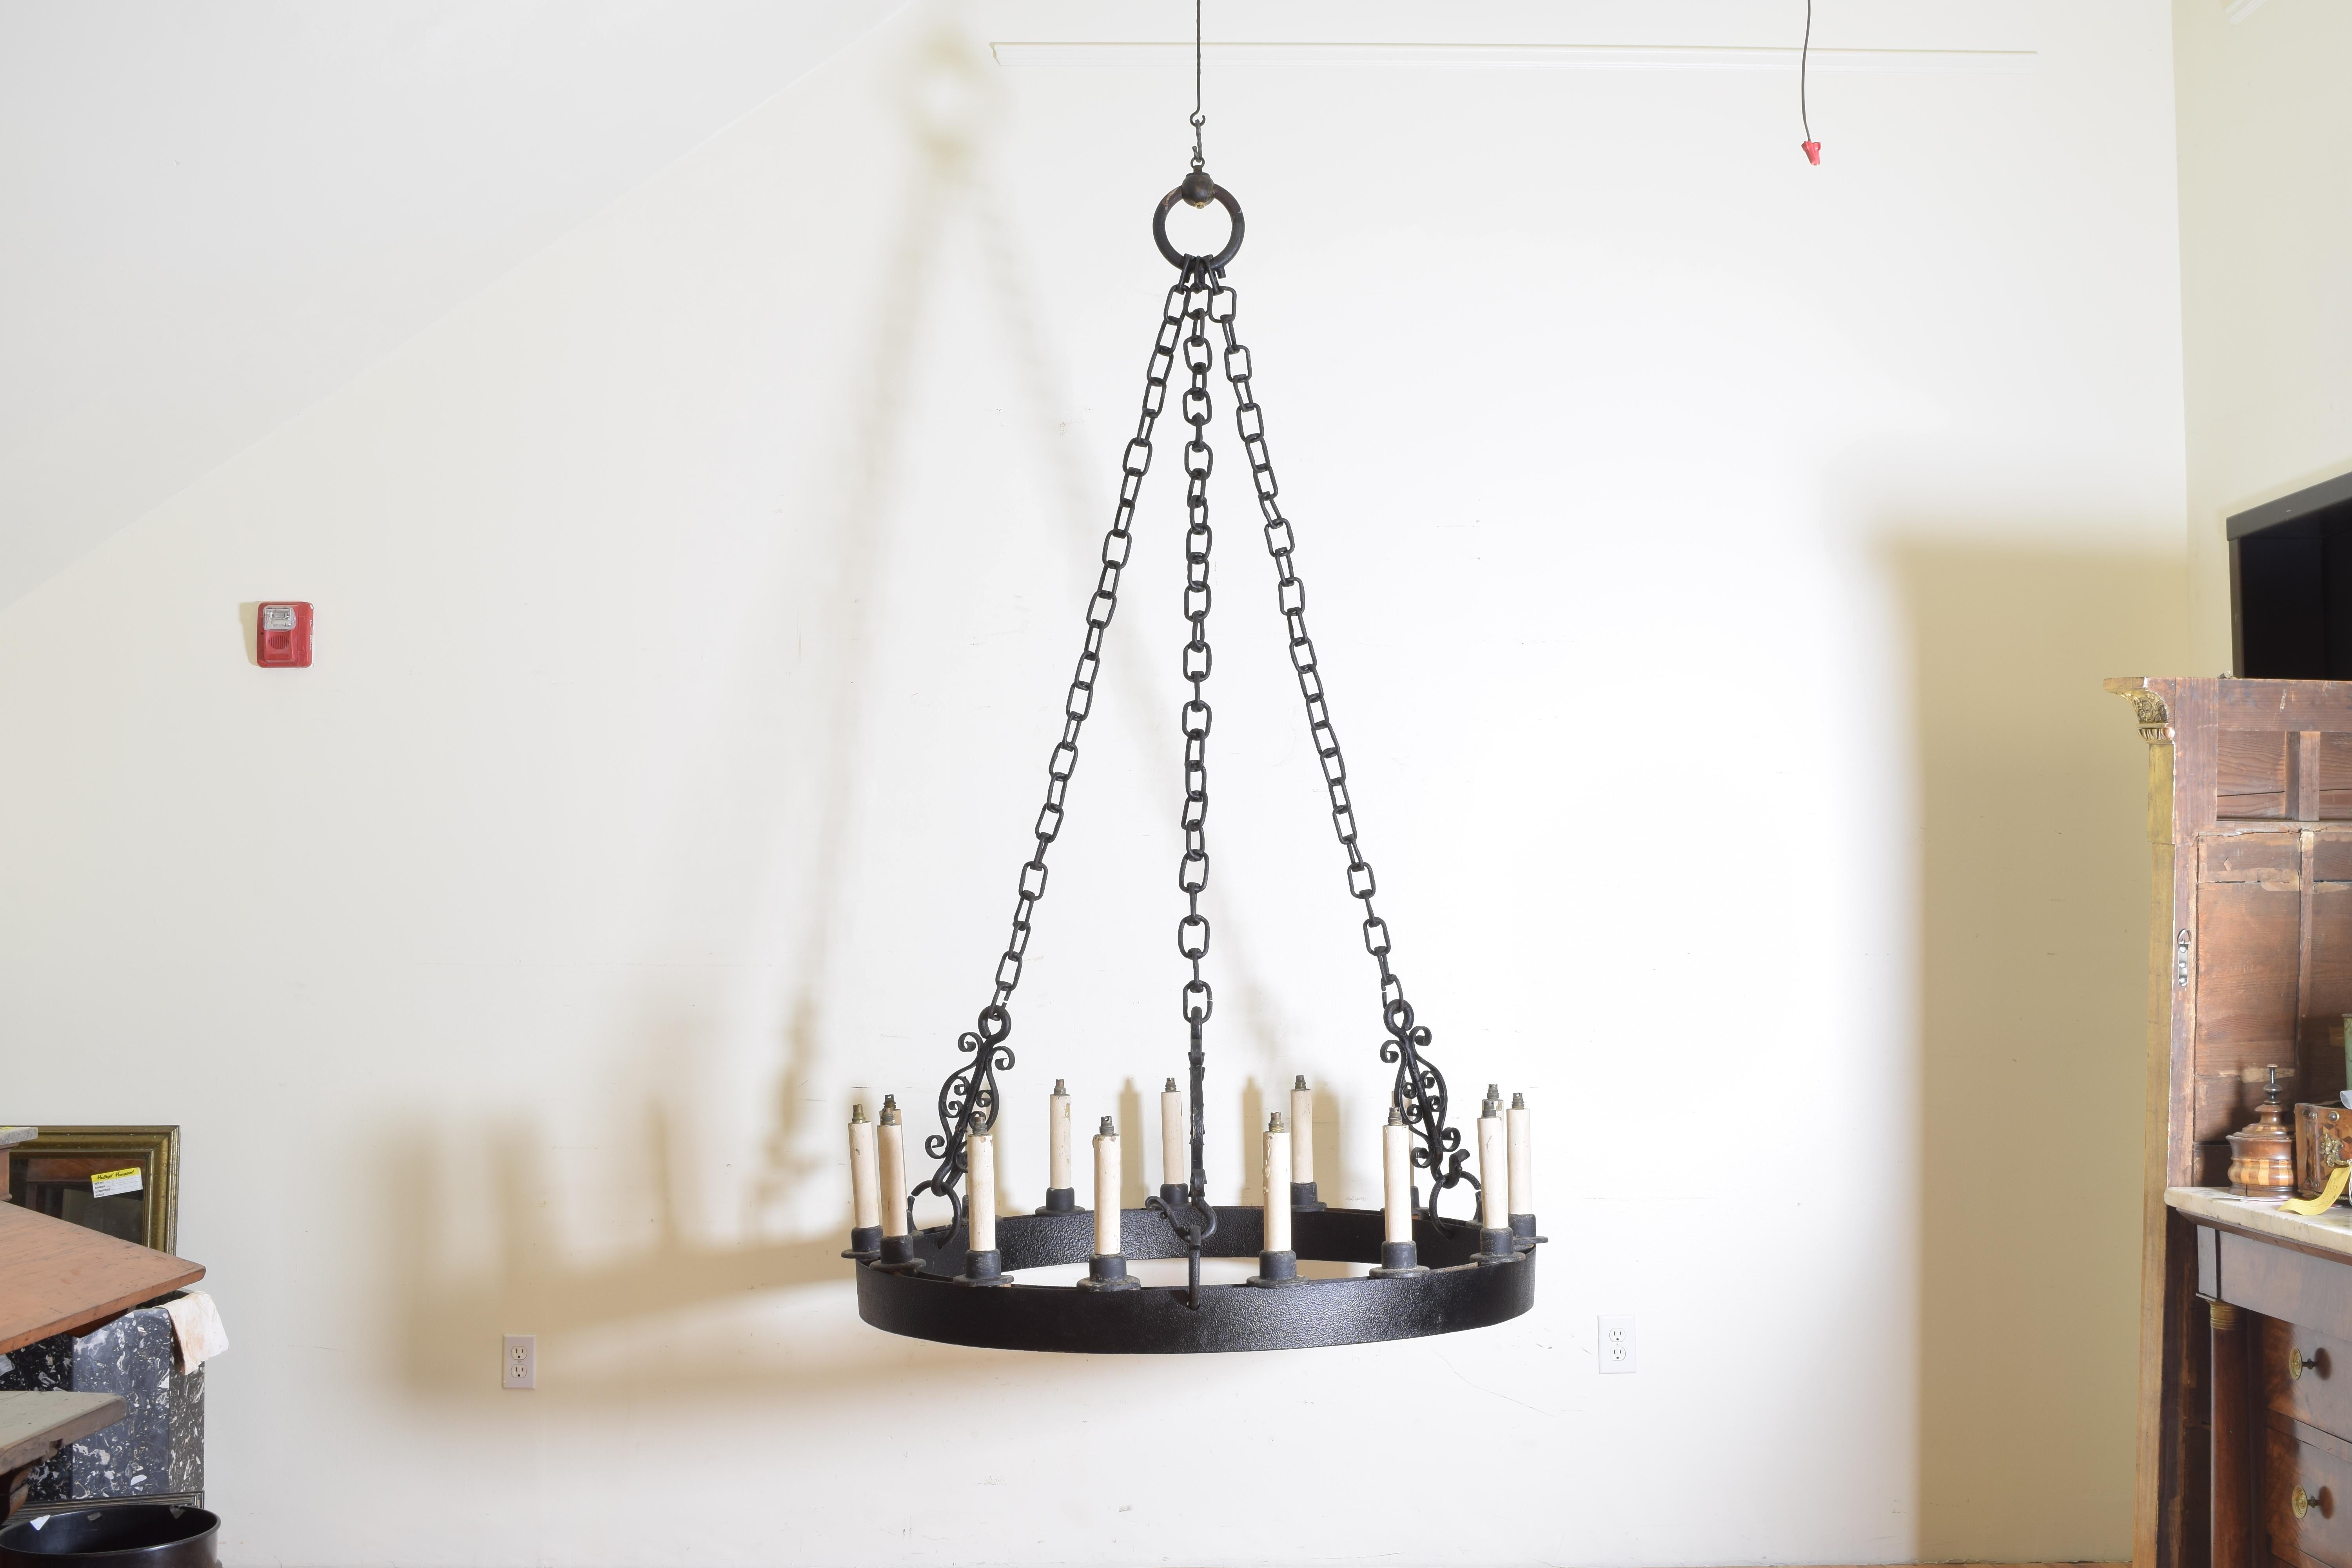 Formerly having original gas lines within the round frames, these large ring chandeliers retain their original chains and connectors, the chains with round openings which allowed the iron tubing to travel to the ceiling, having inserted wooden